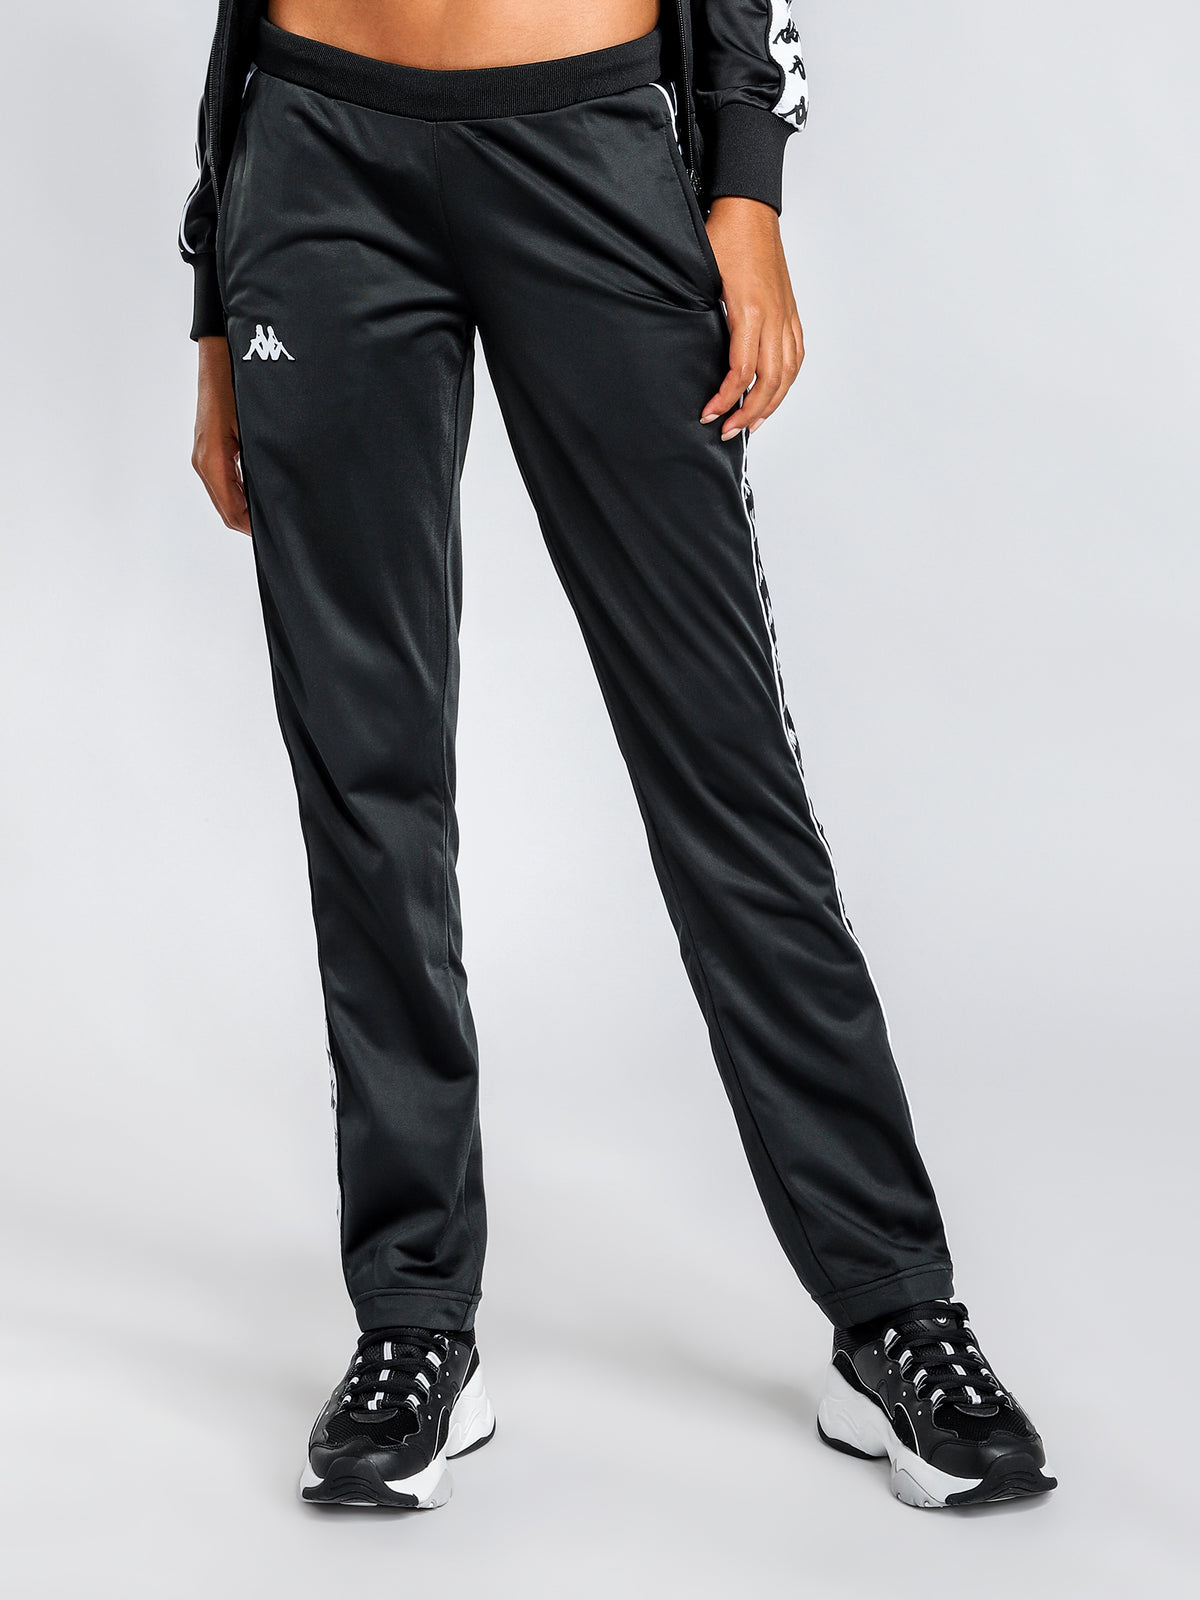 222 Banda Wastor Track Pants in Black and White